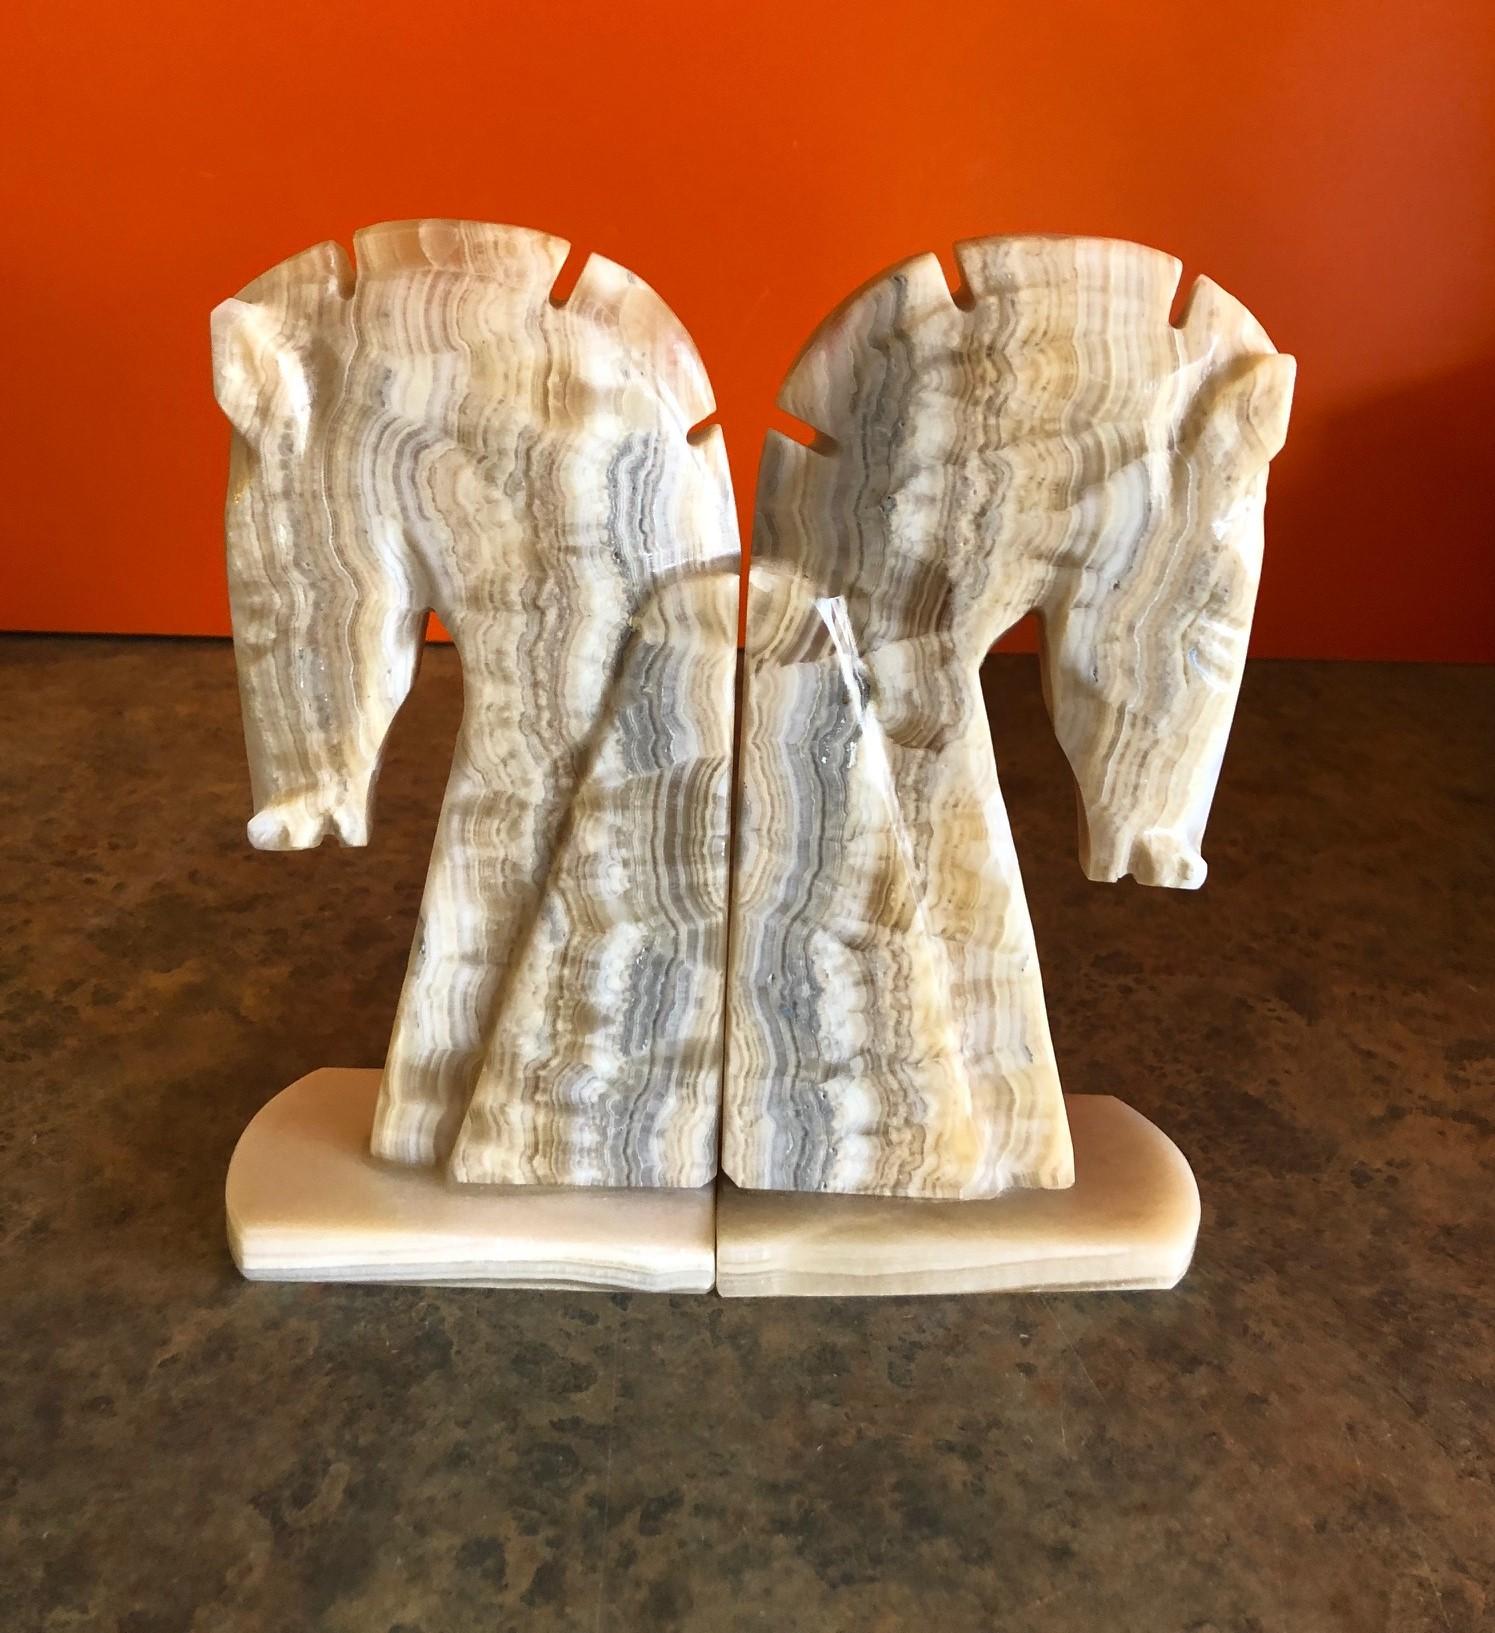 Very stylish pair of midcentury tan / grey marble horse head bookends, circa 1970s. The bookends are heavy and solid and well crafted. They would make a great addition to any office or den.